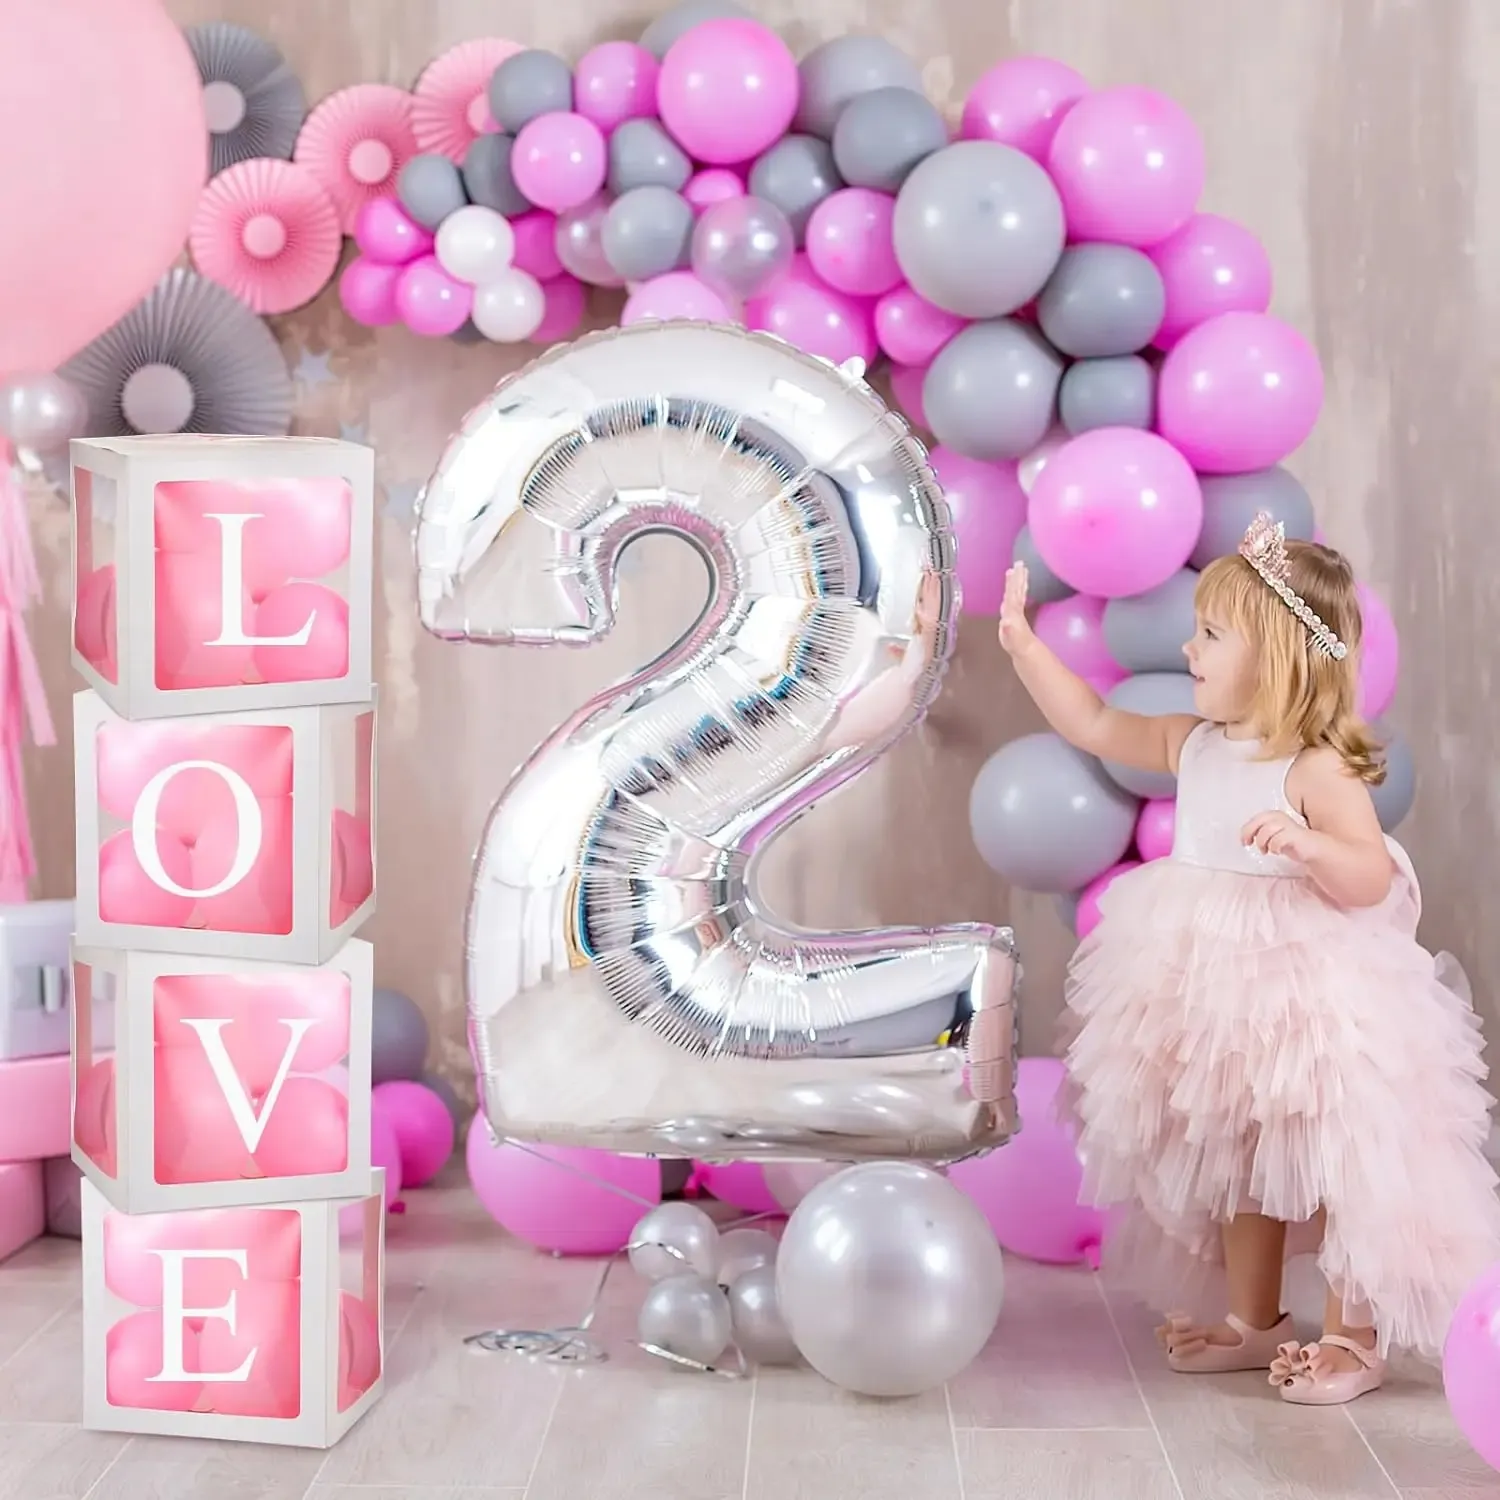 Most Popular White Transparent Letter A-Z Box Baby Shower DIY Balloon Box 1st Birthday Party Supplies Wedding Xmas Decorations